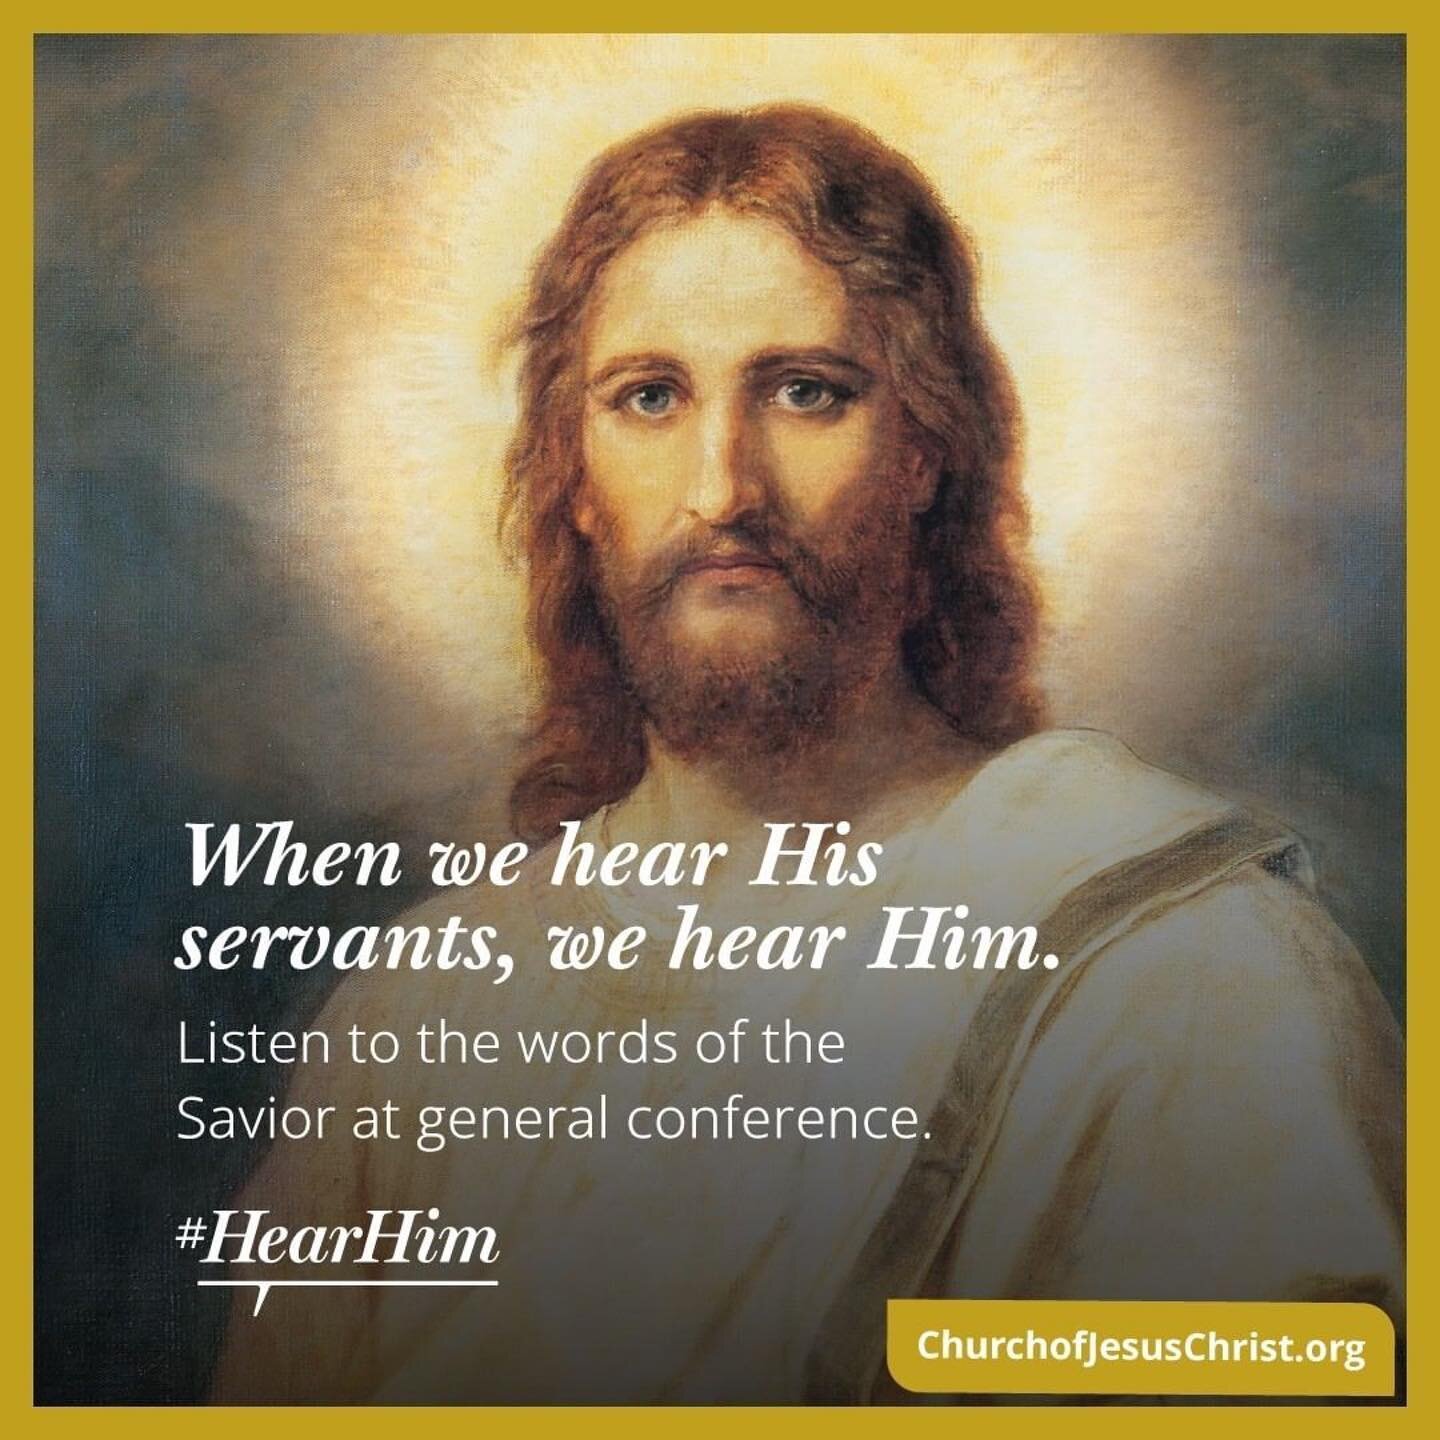 His gospel brings us hope and peace. This general conference will be different than ever before, but the principle that you can hear the voice of Jesus Christ&mdash;wherever you are&mdash;remains the same.

Join us this weekend. #HearHim 
Watch or li